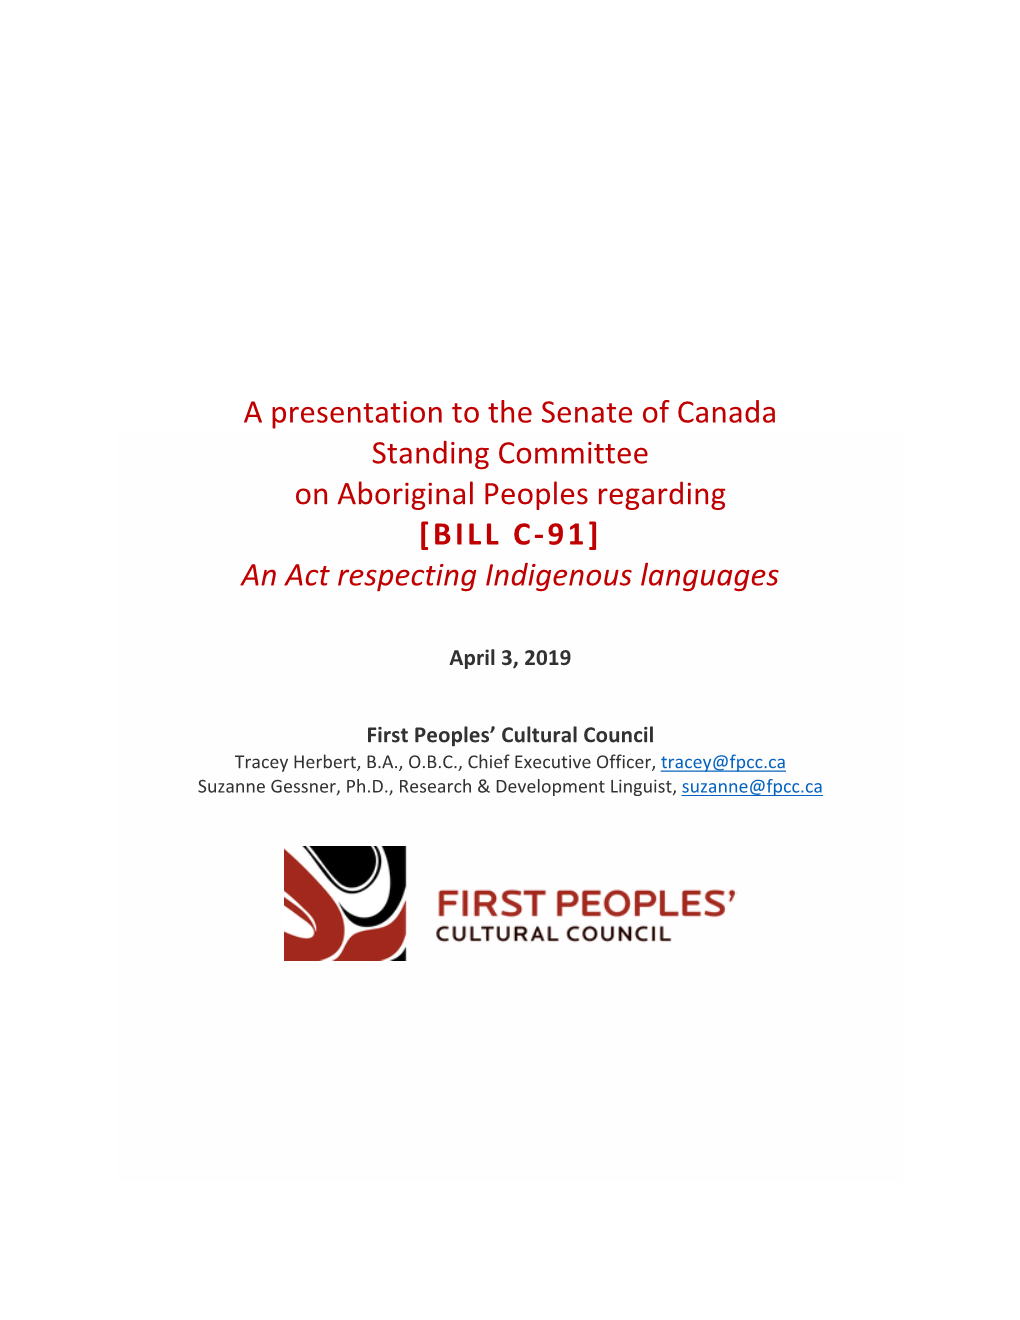 [BILL C-91] an Act Respecting Indigenous Languages